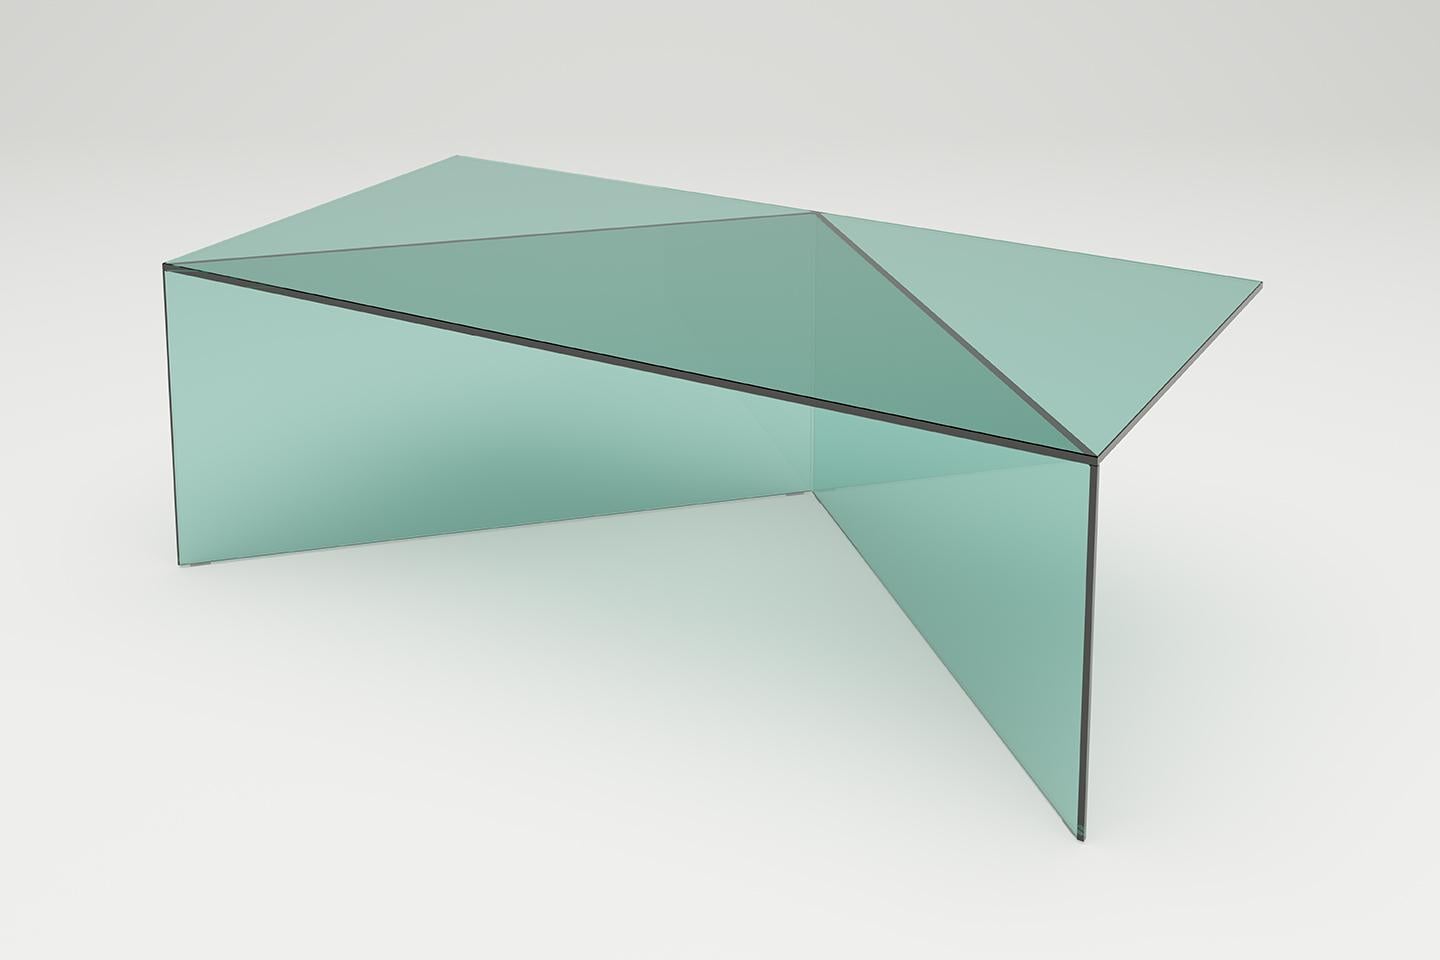 Green clear glass poly oblong coffe table by Sebastian Scherer
Dimensions: D120 x W30 x H40 cm
Materials: Solid coloured glass.
Weight: 34.4 kg.
Also Available: Colours:Clear white (transparent) / clear green / clear blue / clear bronze / clear